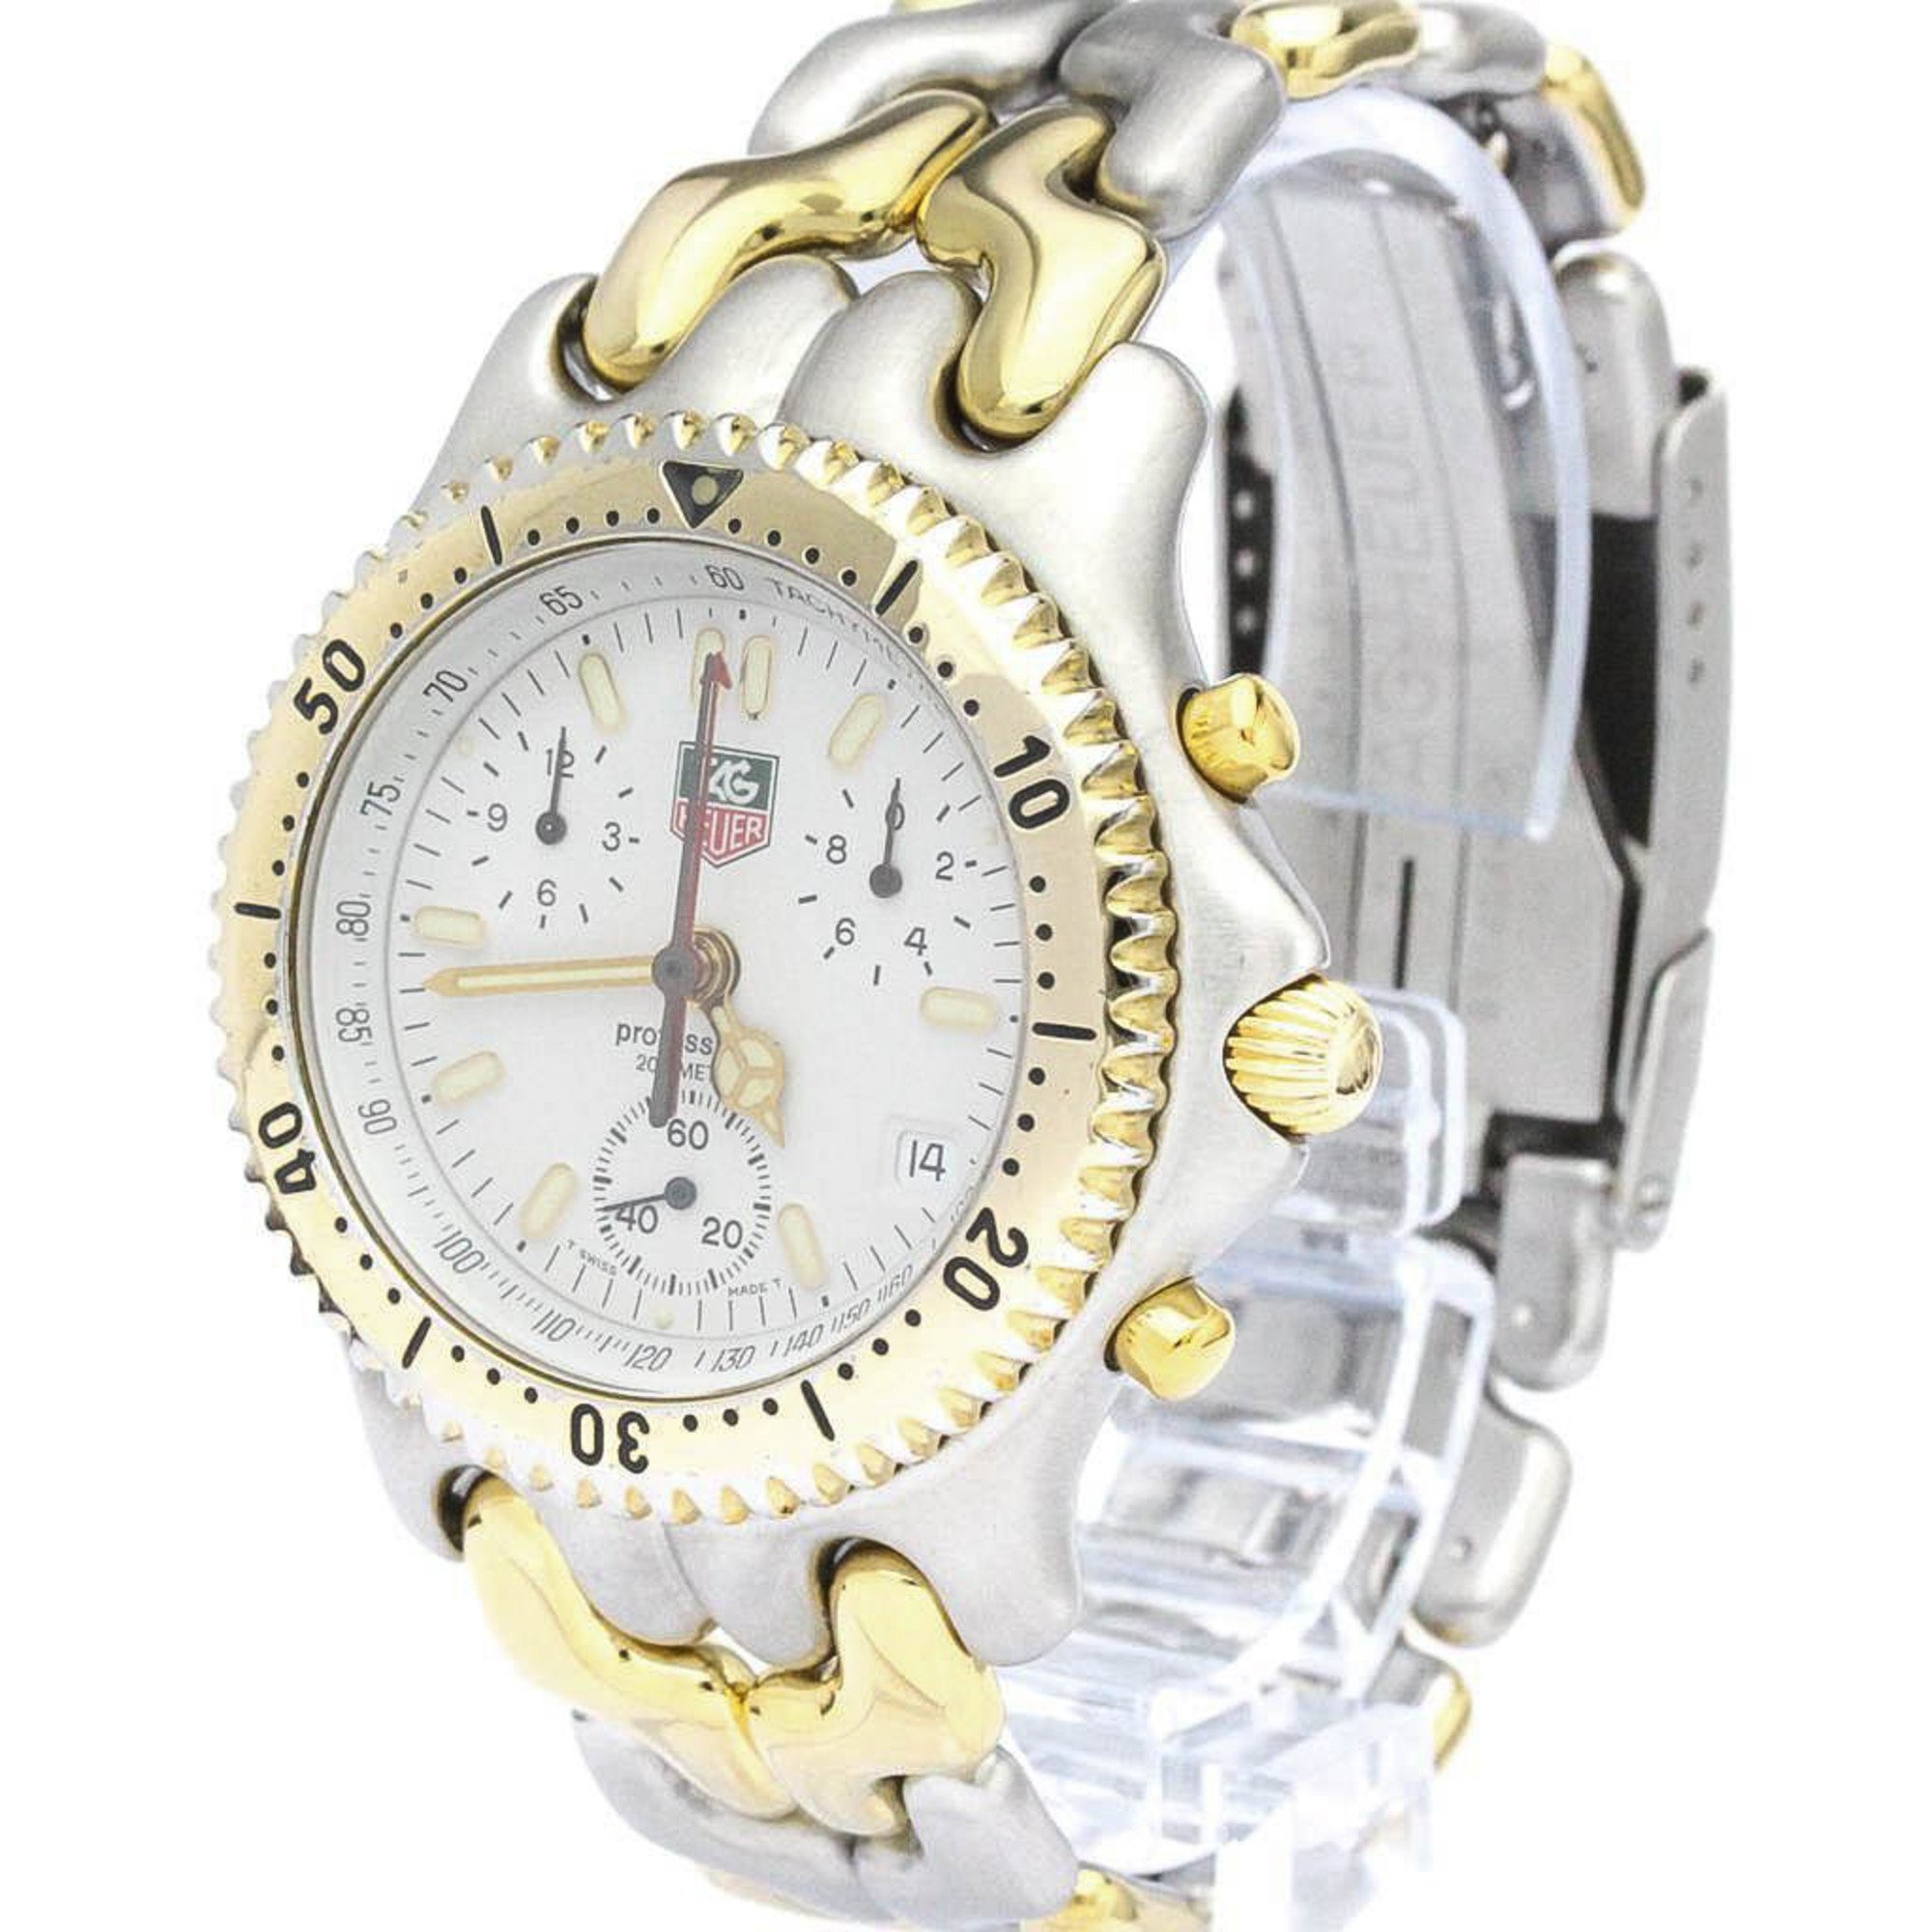 Polished TAG Heuer Sel Chronograph Gold Plated Steel Mens Watch CG1120 BF561981